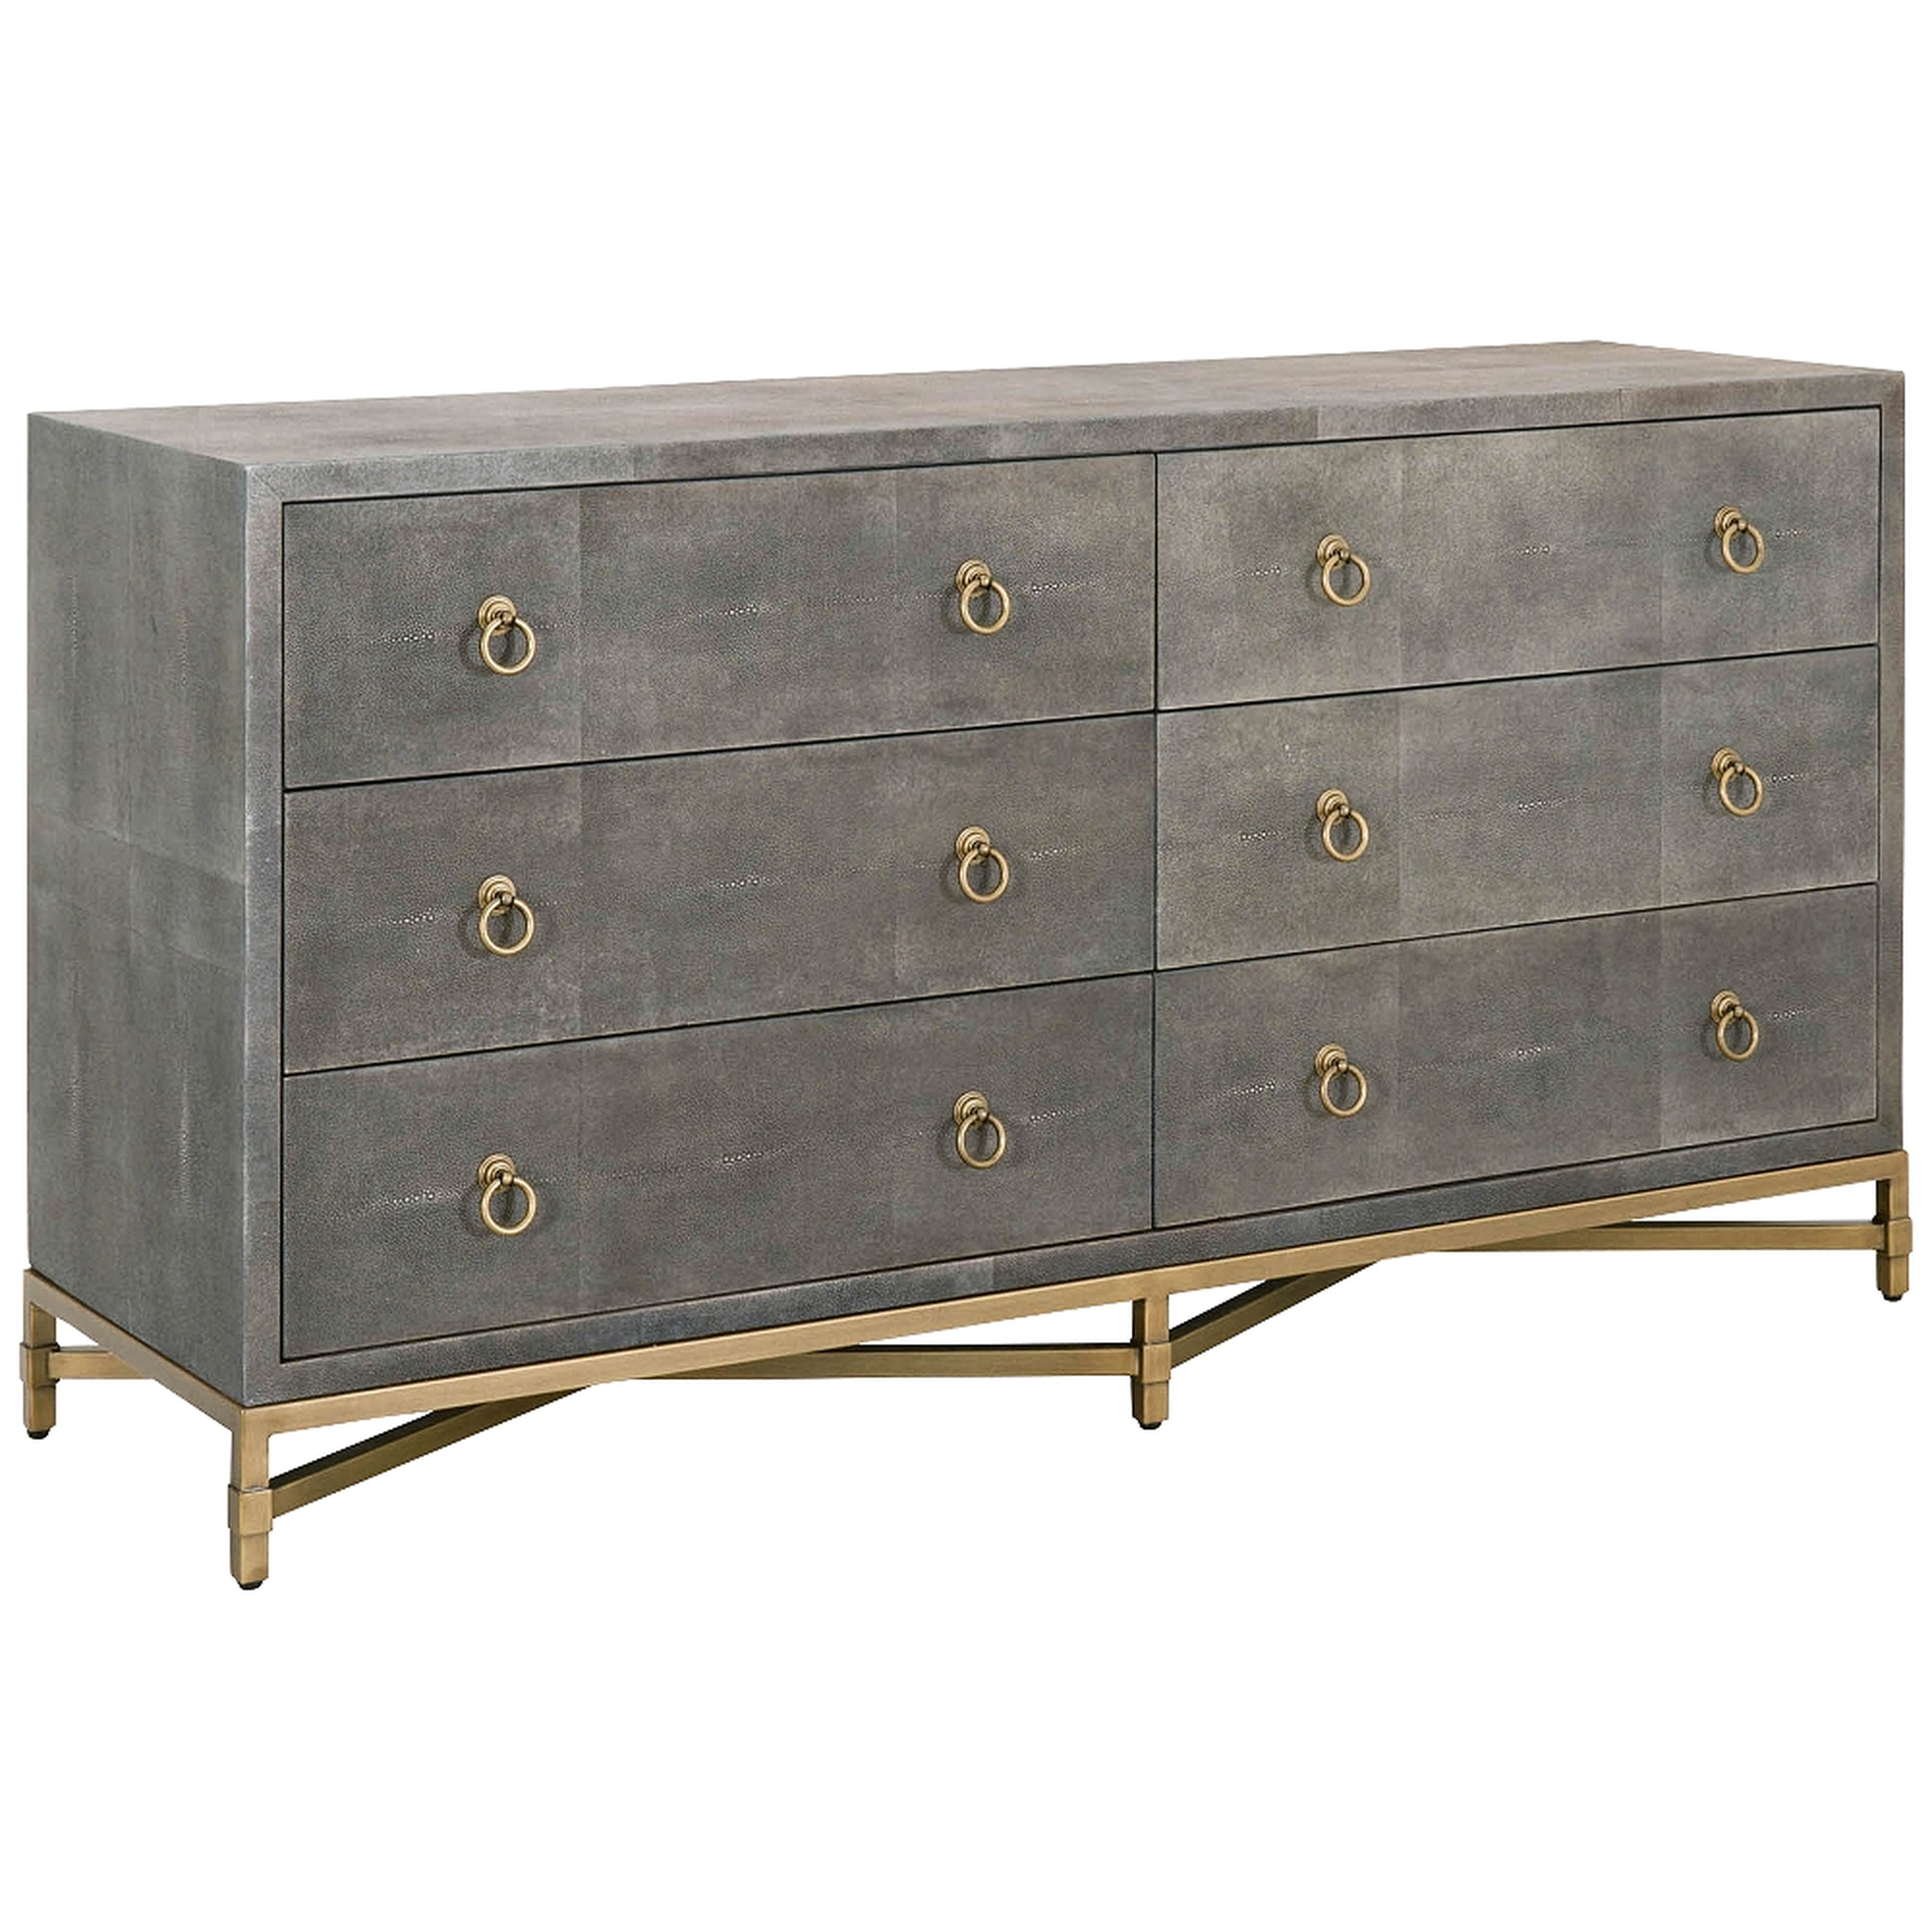 Strand 68" Wide Gray Faux Shagreen 6-Drawer Double Dresser - Style # 86J32 - Lamps Plus